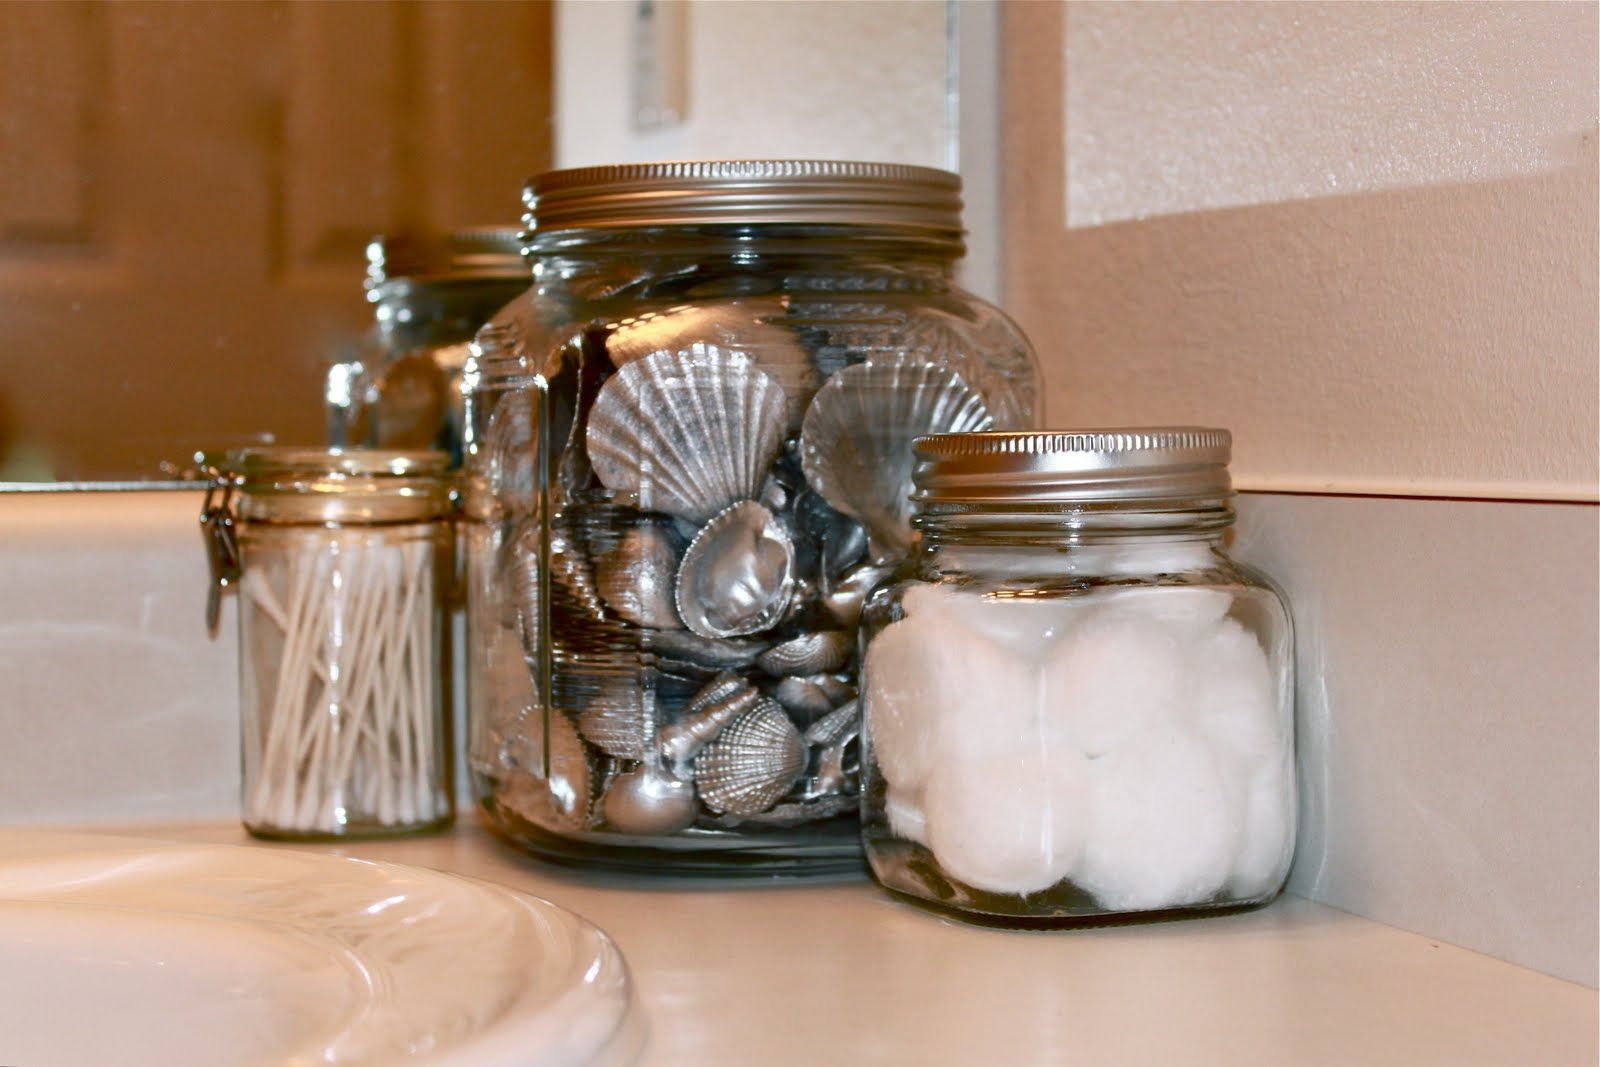 29 Great Seashells In Glass Vase 2024 free download seashells in glass vase of diy pottery barn silver seashells pinterest chrome spray paint pertaining to fun idea for seashells collected at the beach could put them in an open vase table lam